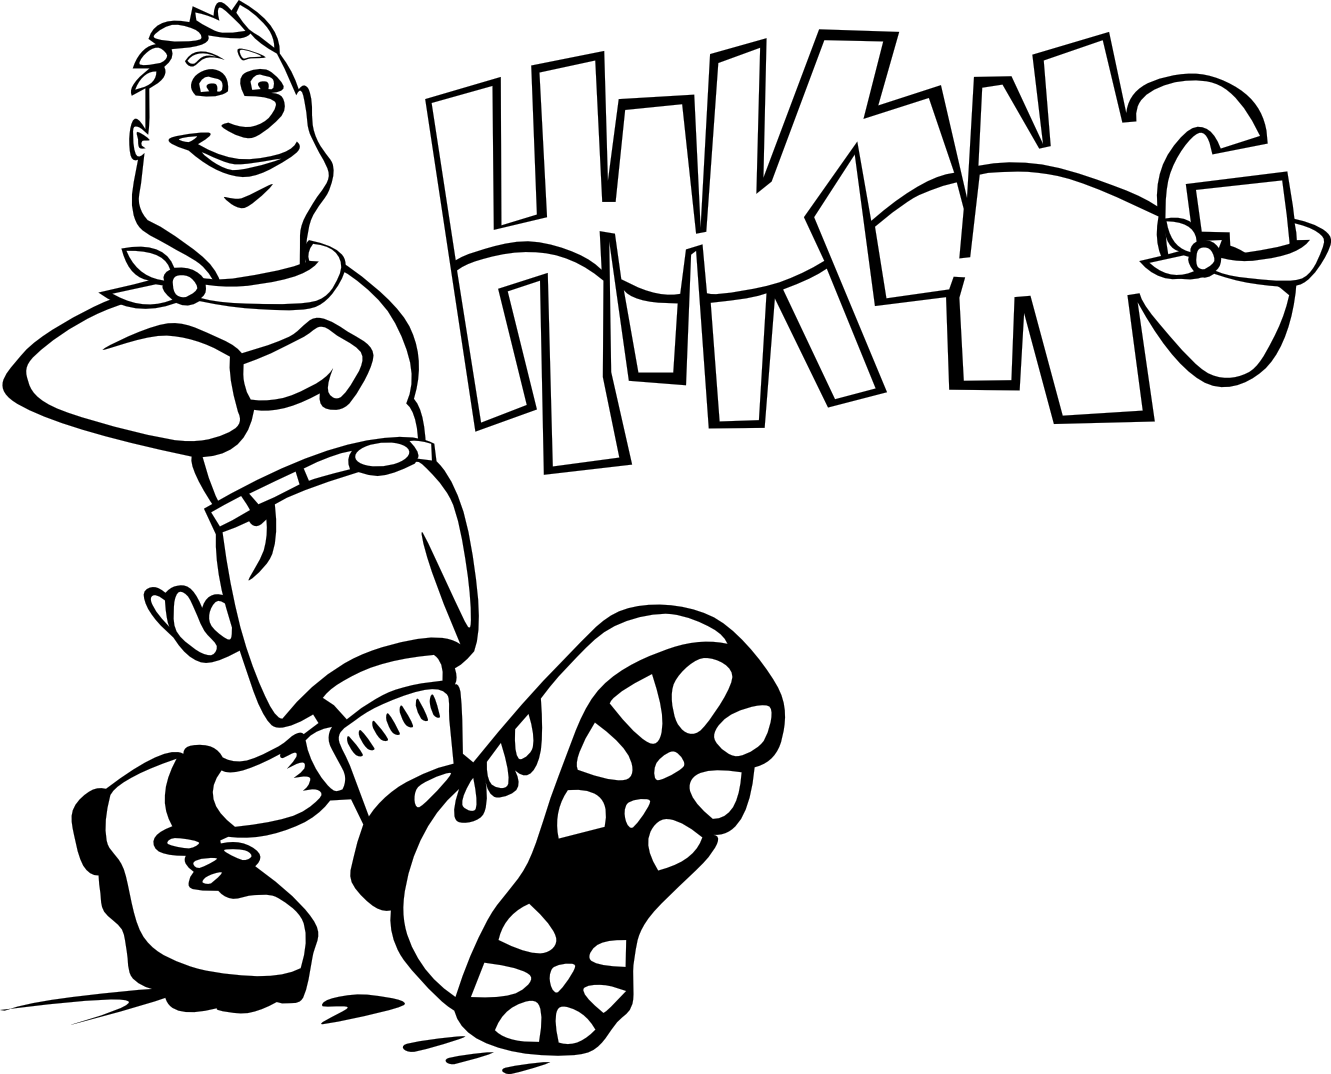 Hiking clipart black and white free images